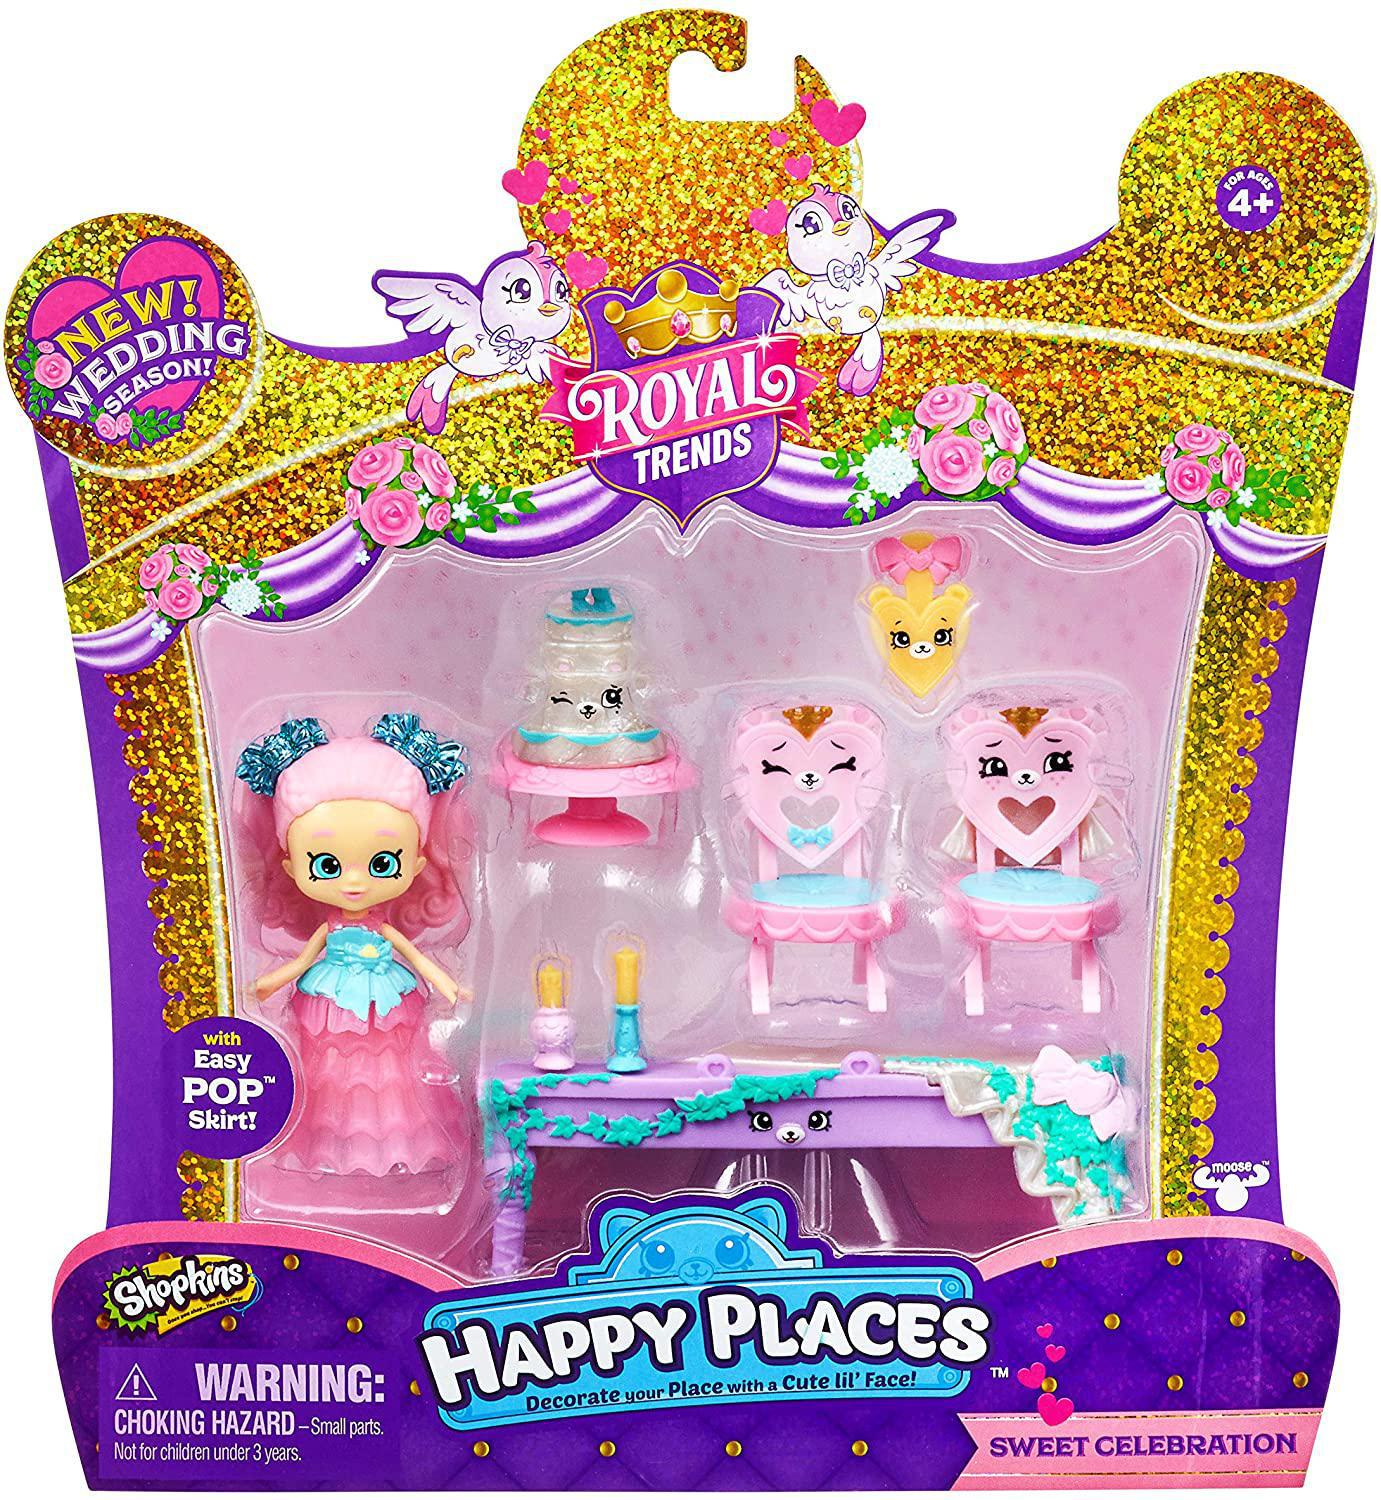 Shopkins Happy Places Happy Scene Doll Figures Playset Pack Sweet Celebration